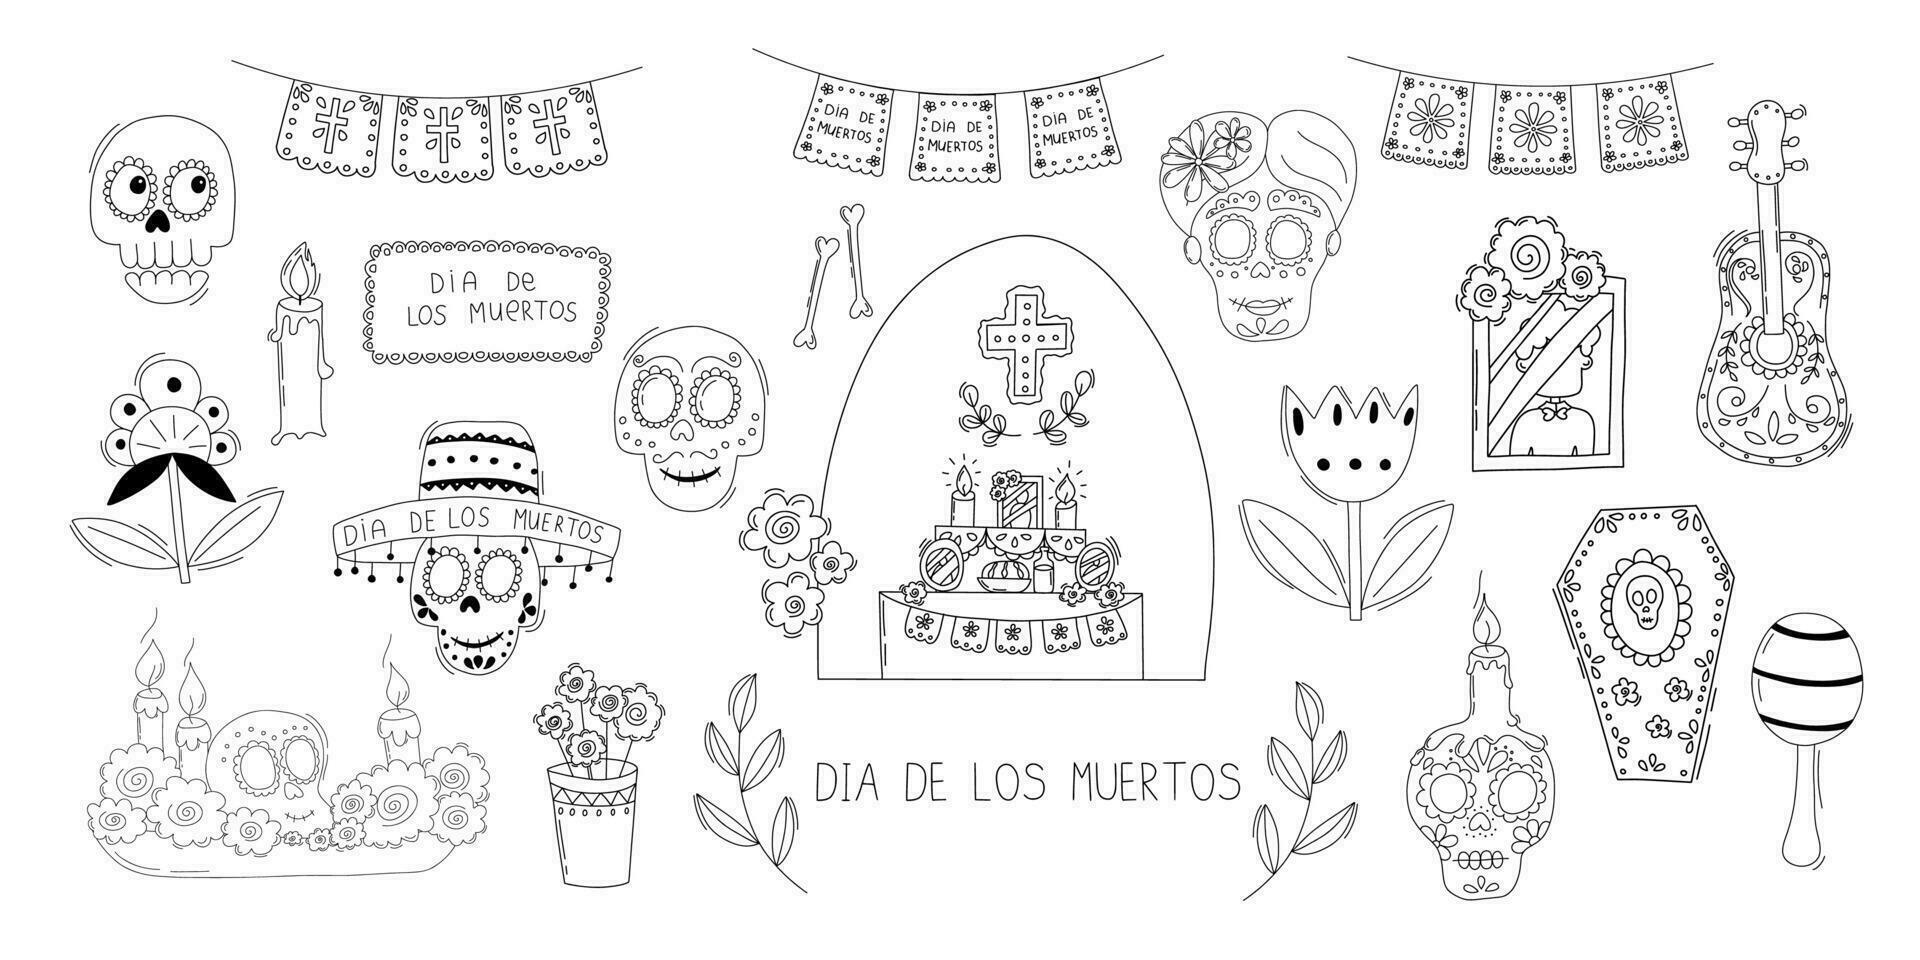 Dia de los Muertos Set of Simple Vector Illustrations in Doodle Style. . Latin American Holidays and Traditions. Day of the Dead Mexican Religious Holiday.